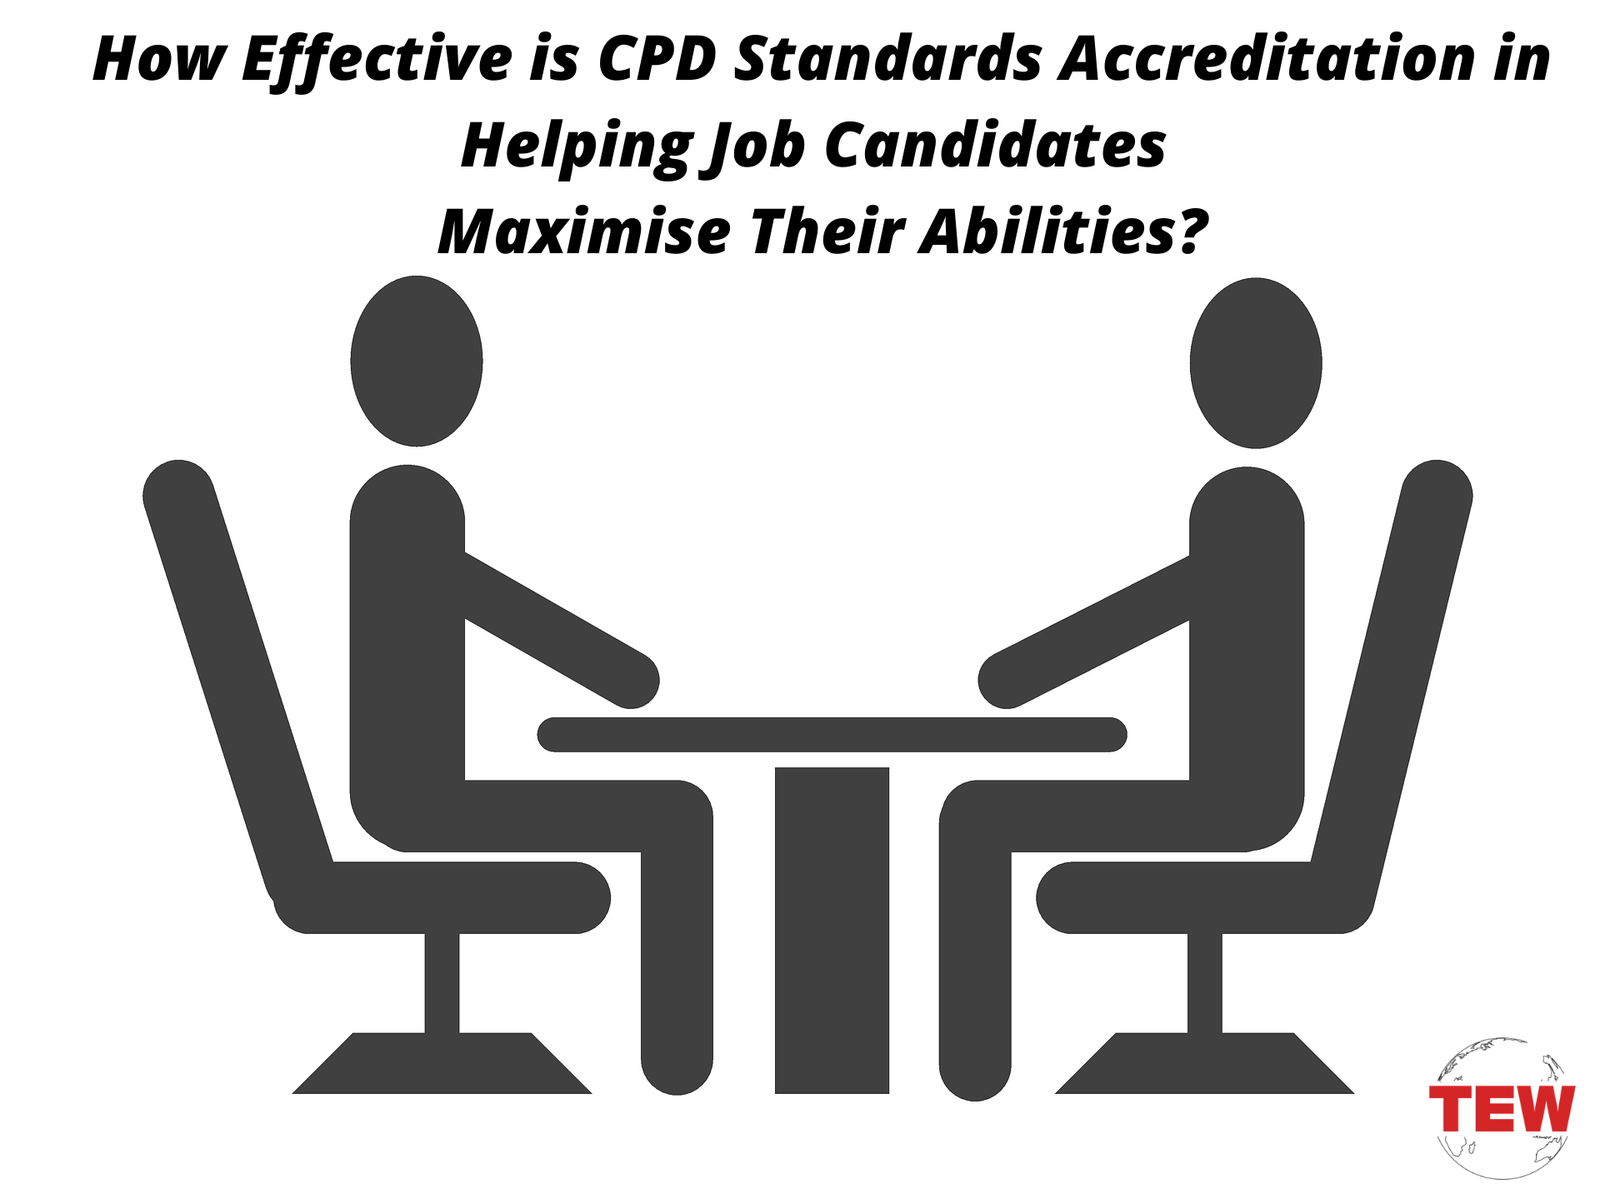 How Effective is CPD Standards Accreditation in Helping Job Candidates Maximise Their Abilities_